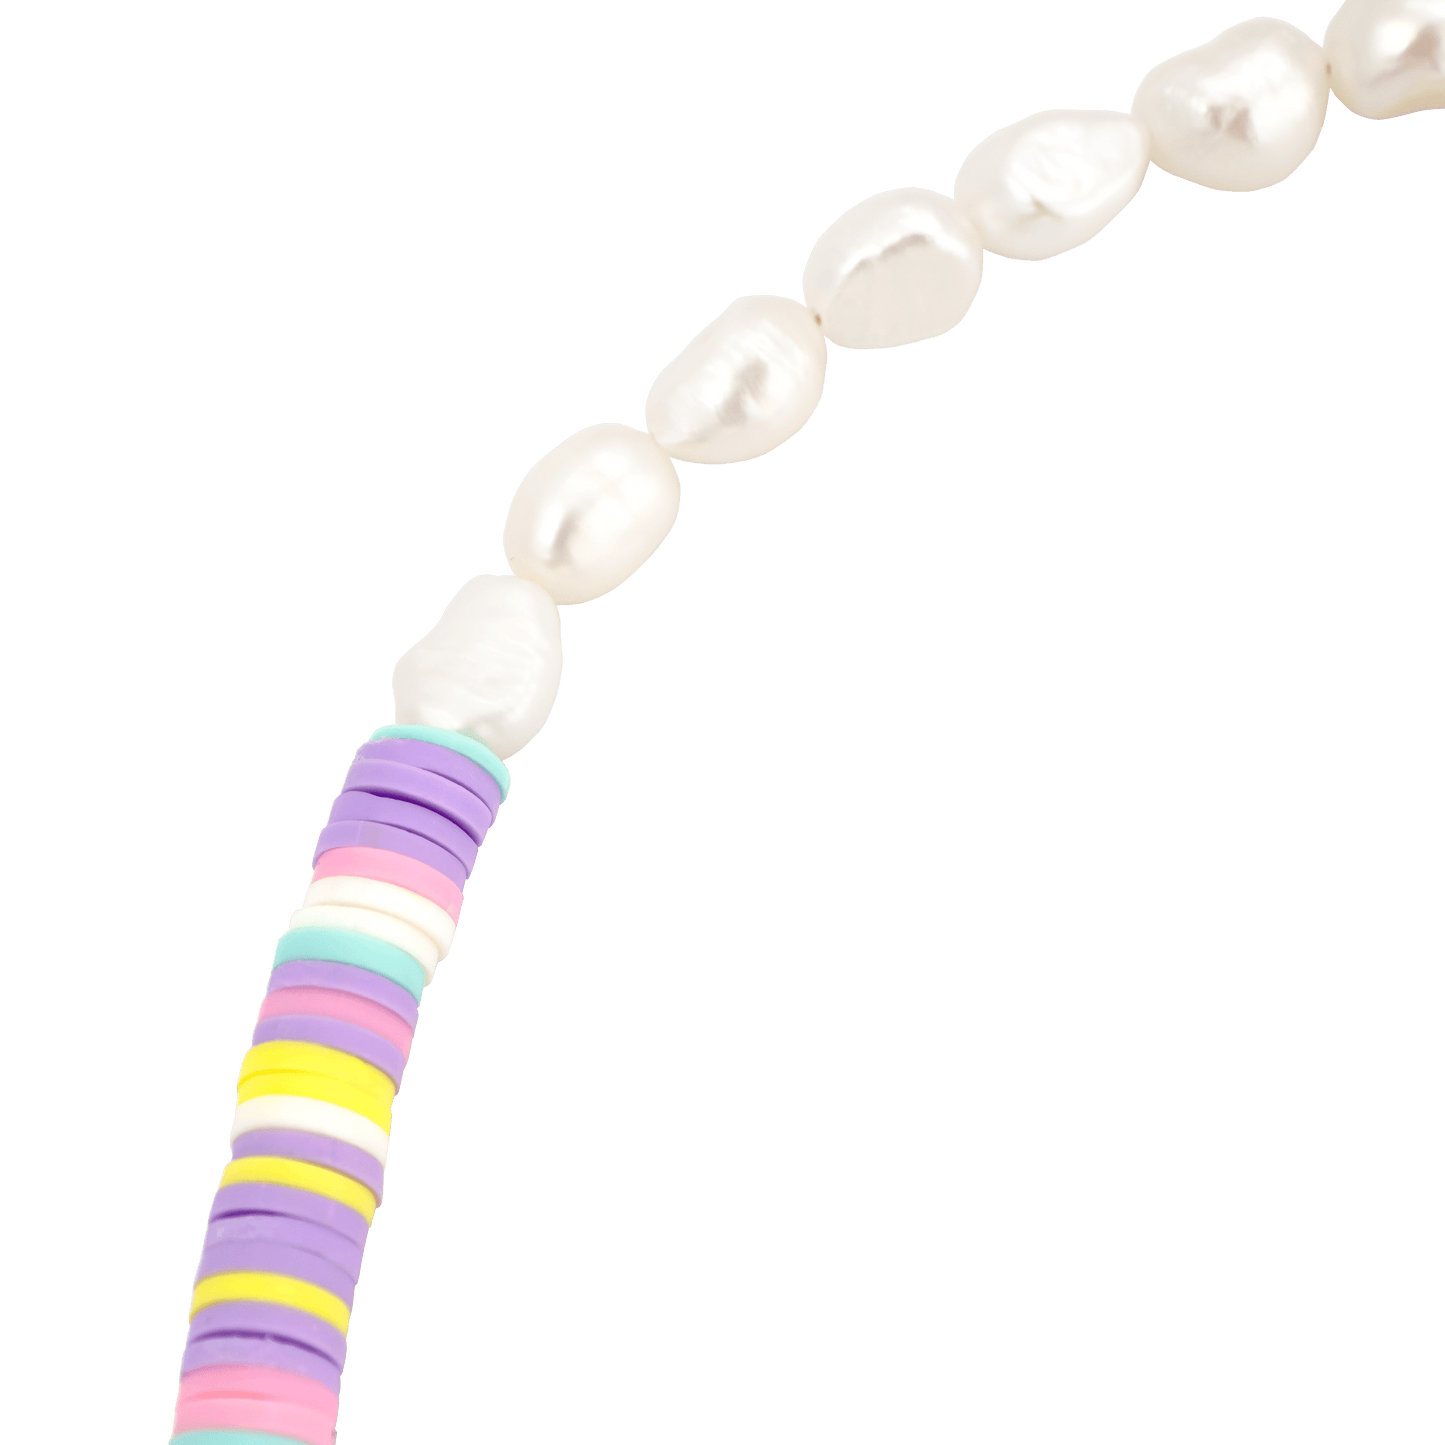 Pastel Pearl Necklace Silber